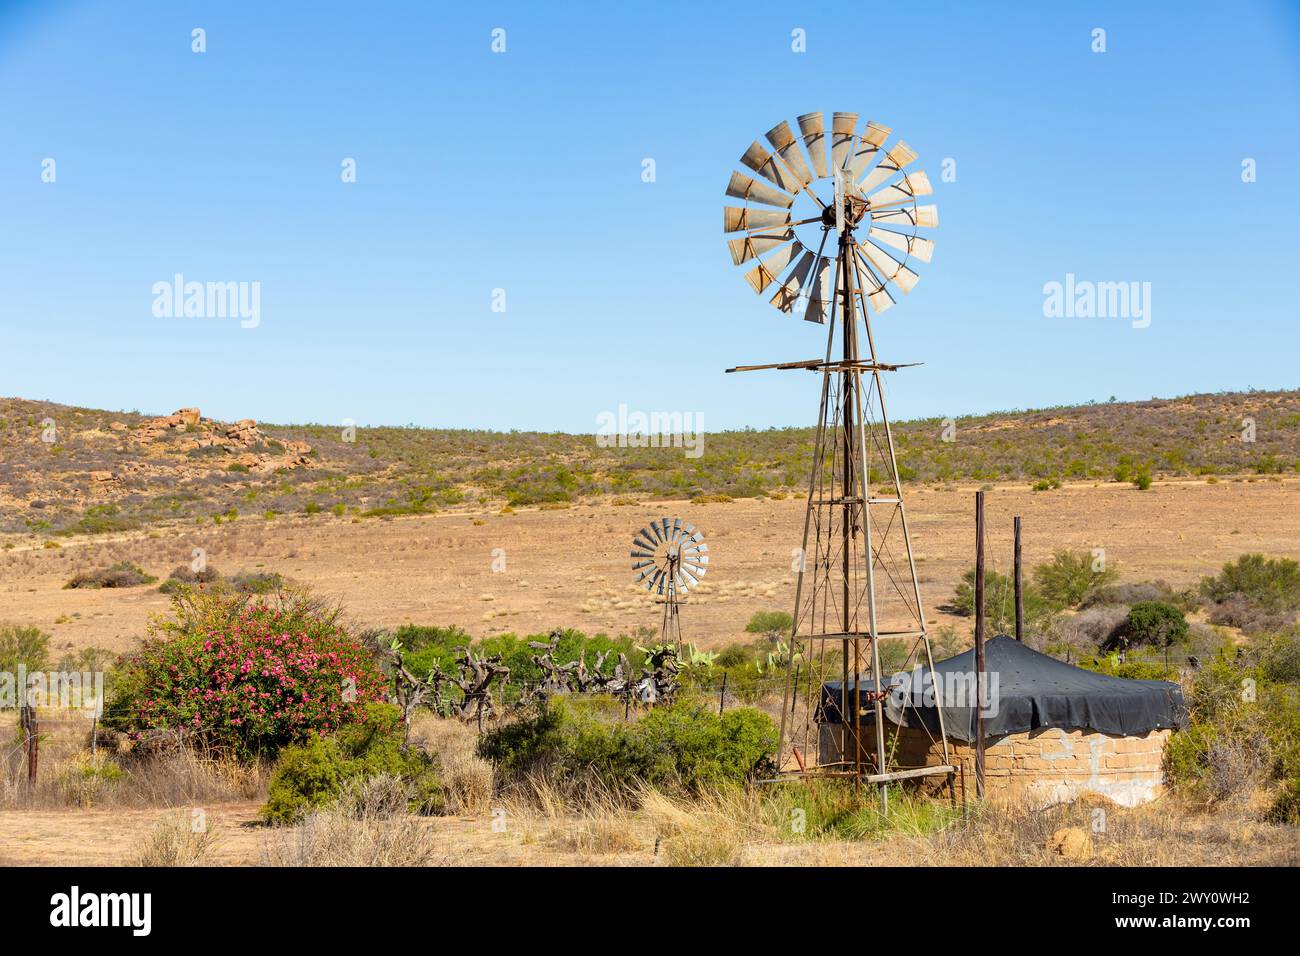 Farming windmill wind pump in the Namaqualand region of South Africa Stock Photo